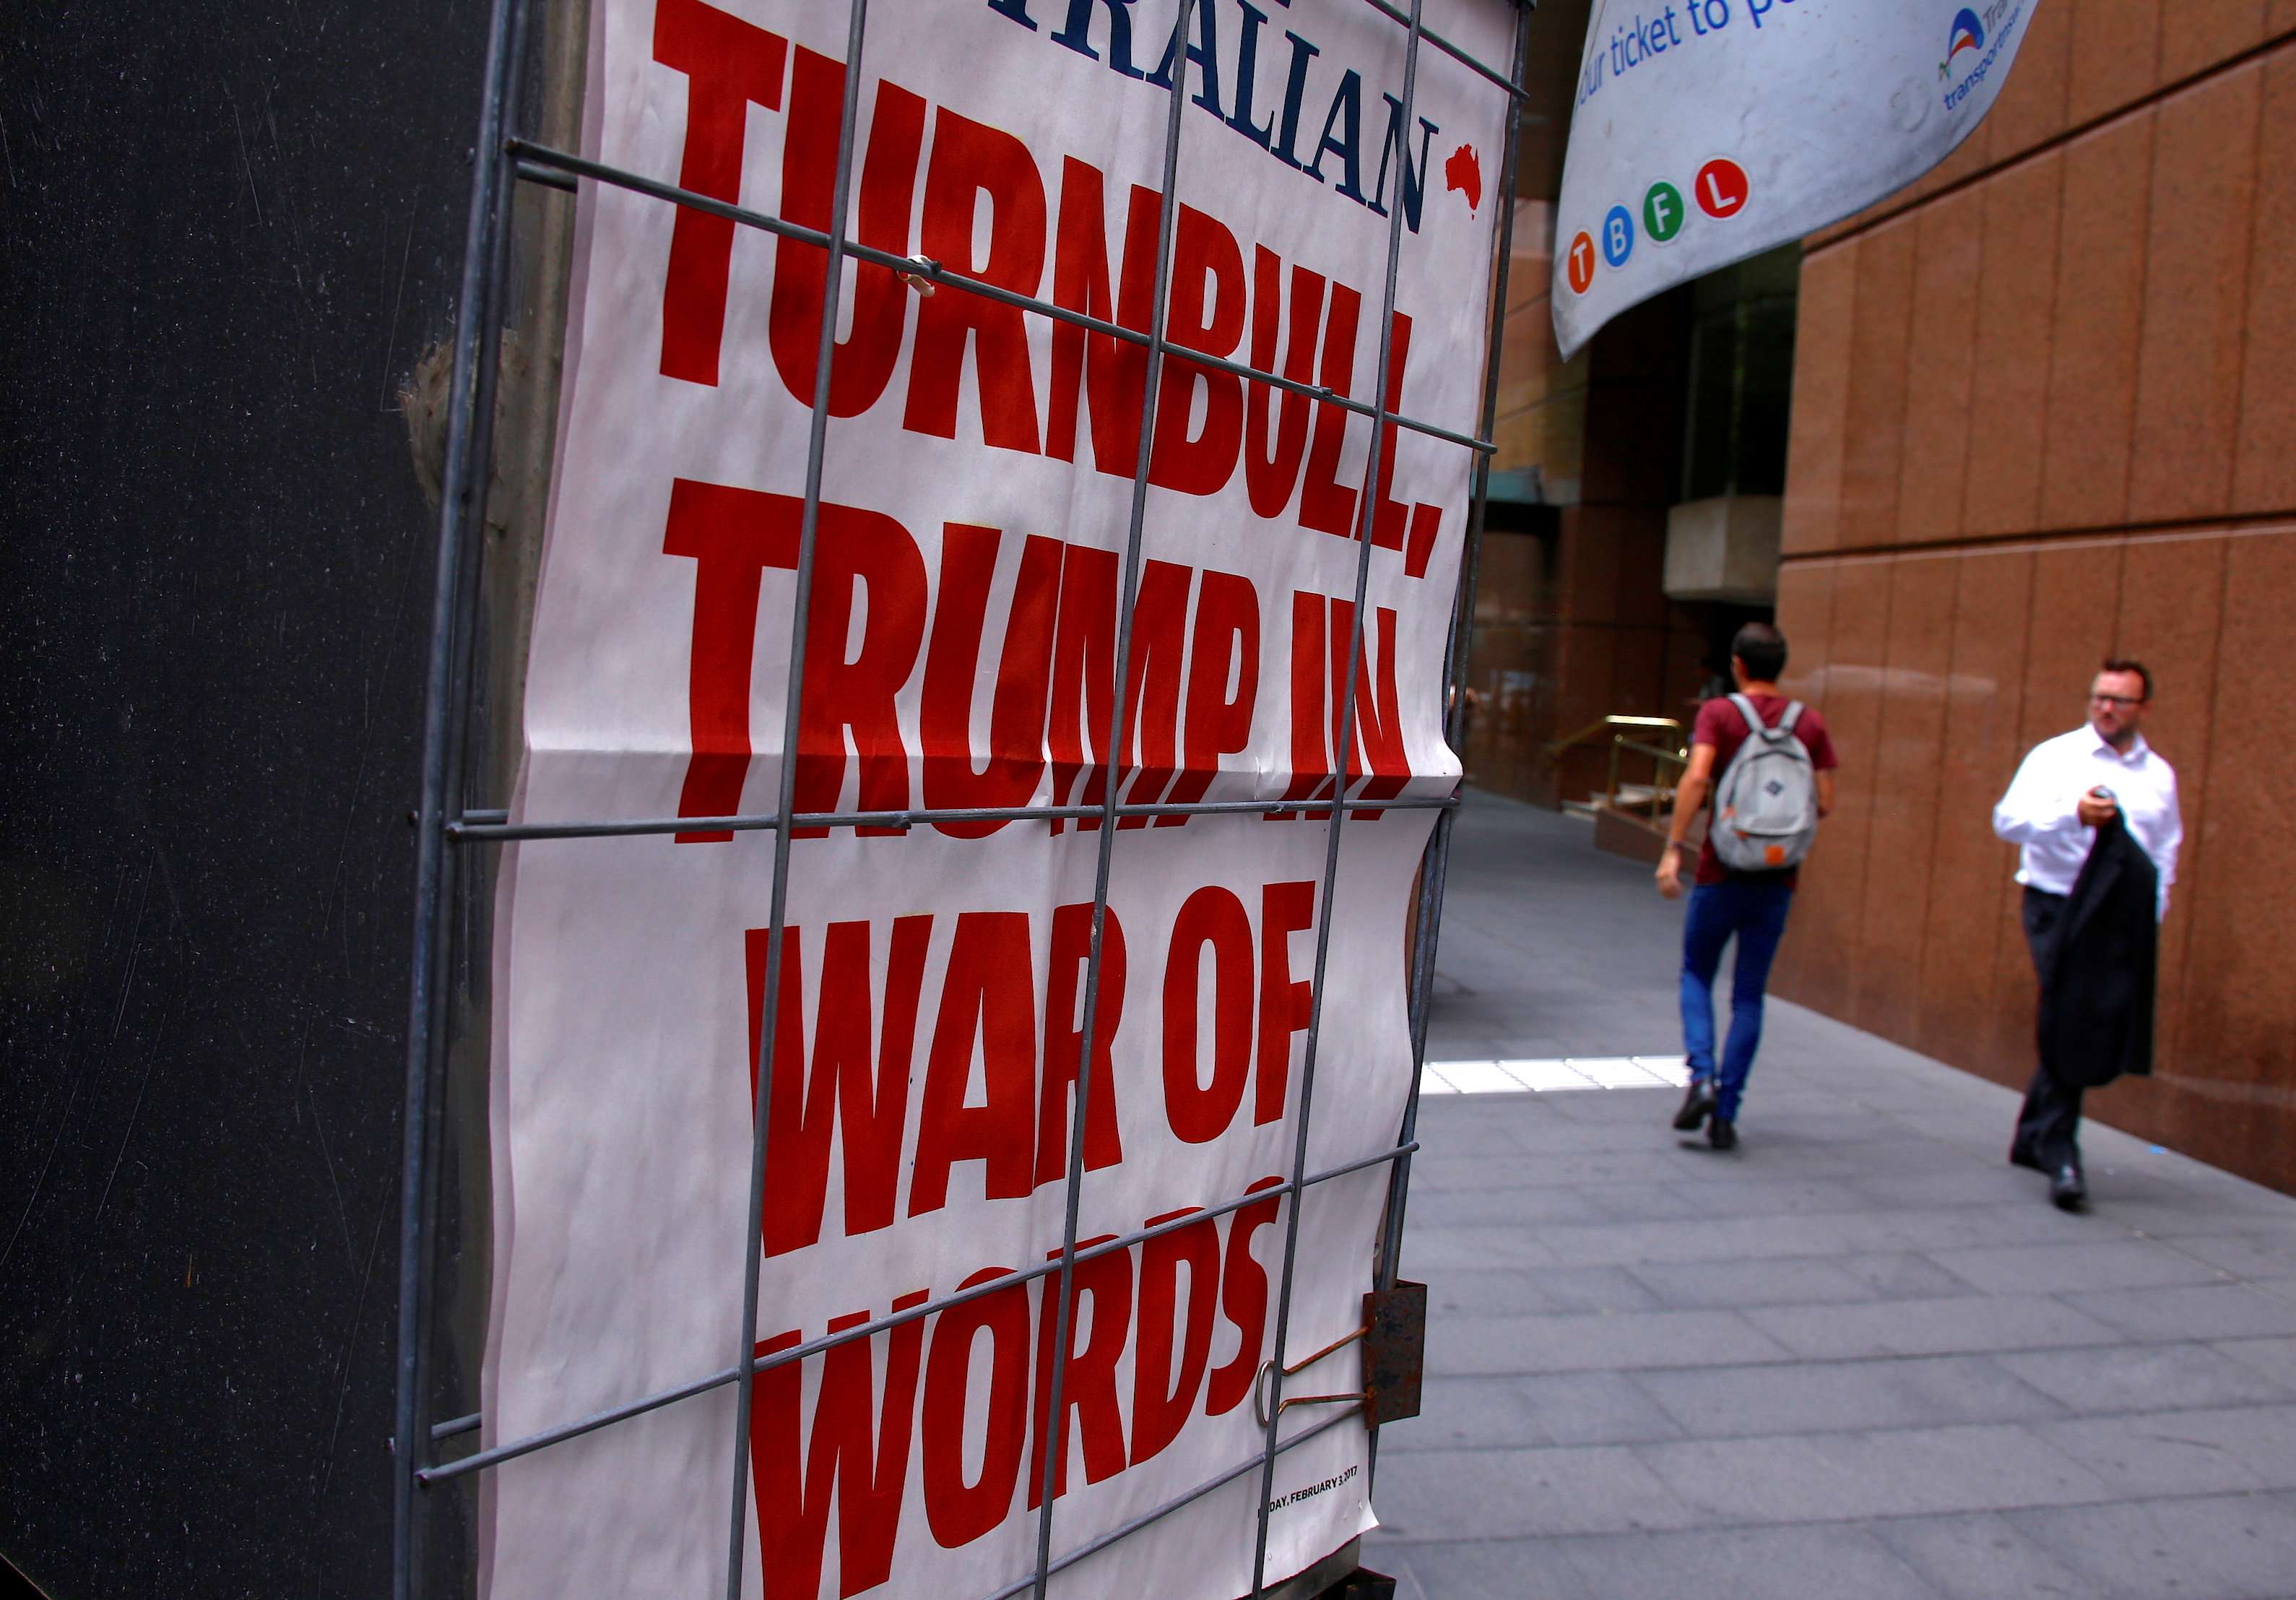 A newspaper headline highlights the phone conversation between US President Donald Trump and Australian Prime Minister Malcolm Turnbull, in central Sydney on February 3. Photo: Reuters